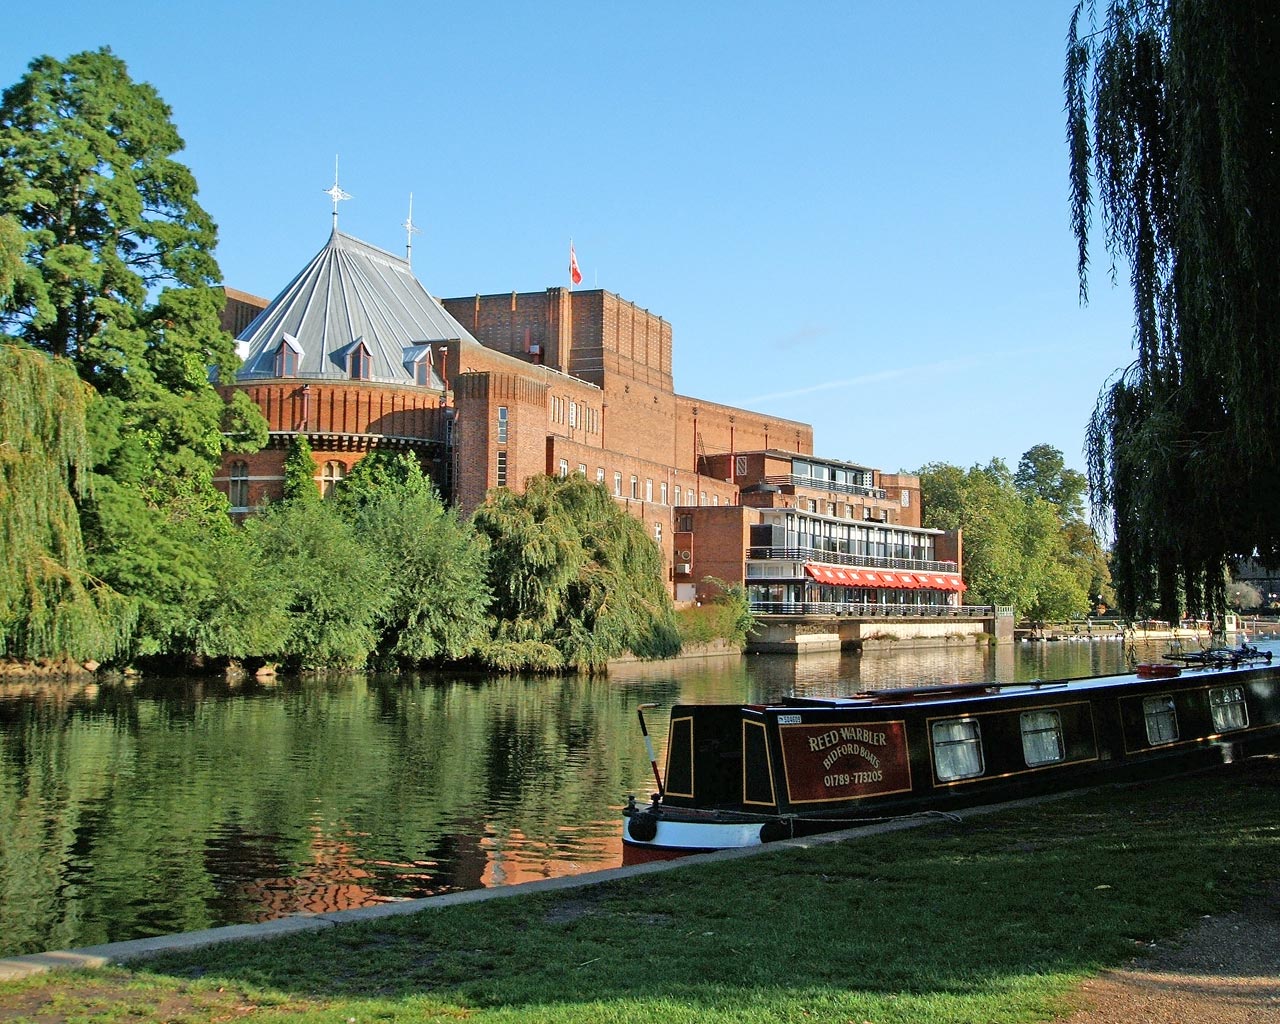 Royal Shakespeare Theatre and River Avon